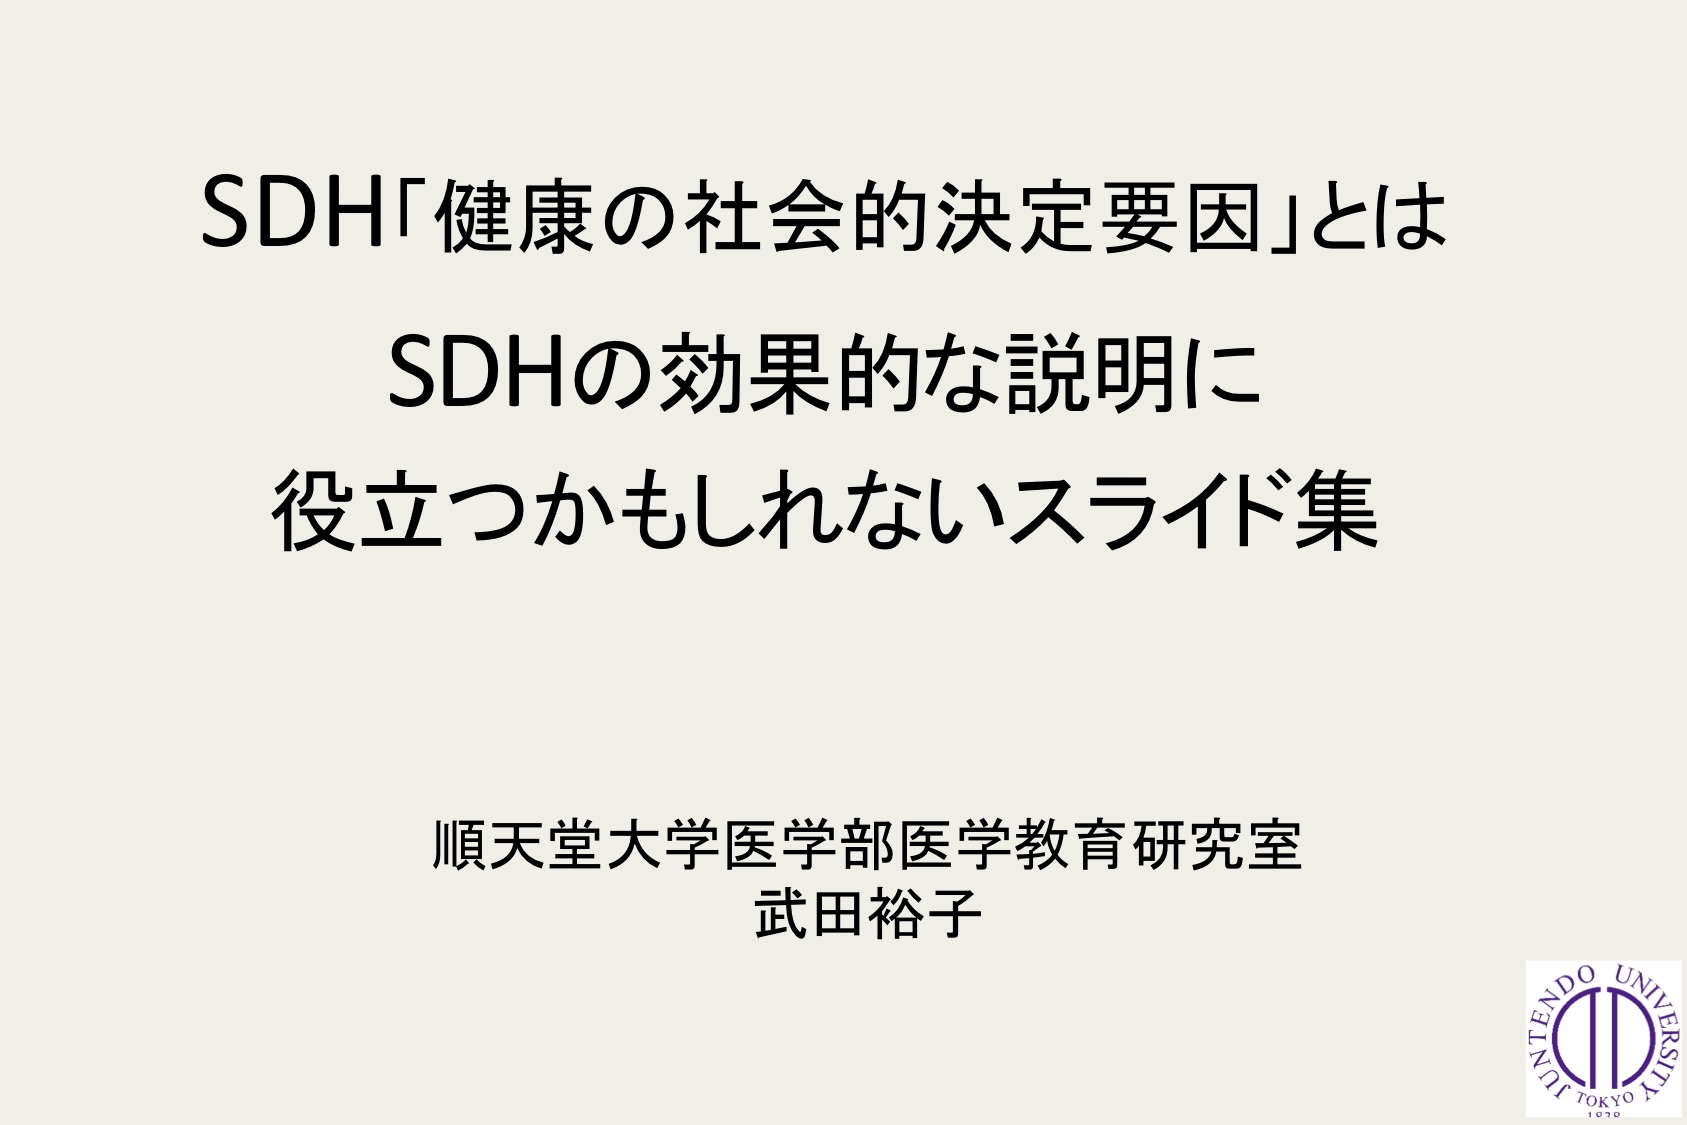 Read more about the article SDH「健康の社会的決定要因」とは SDHの効果的な説明に役立つかもしれないスライド集